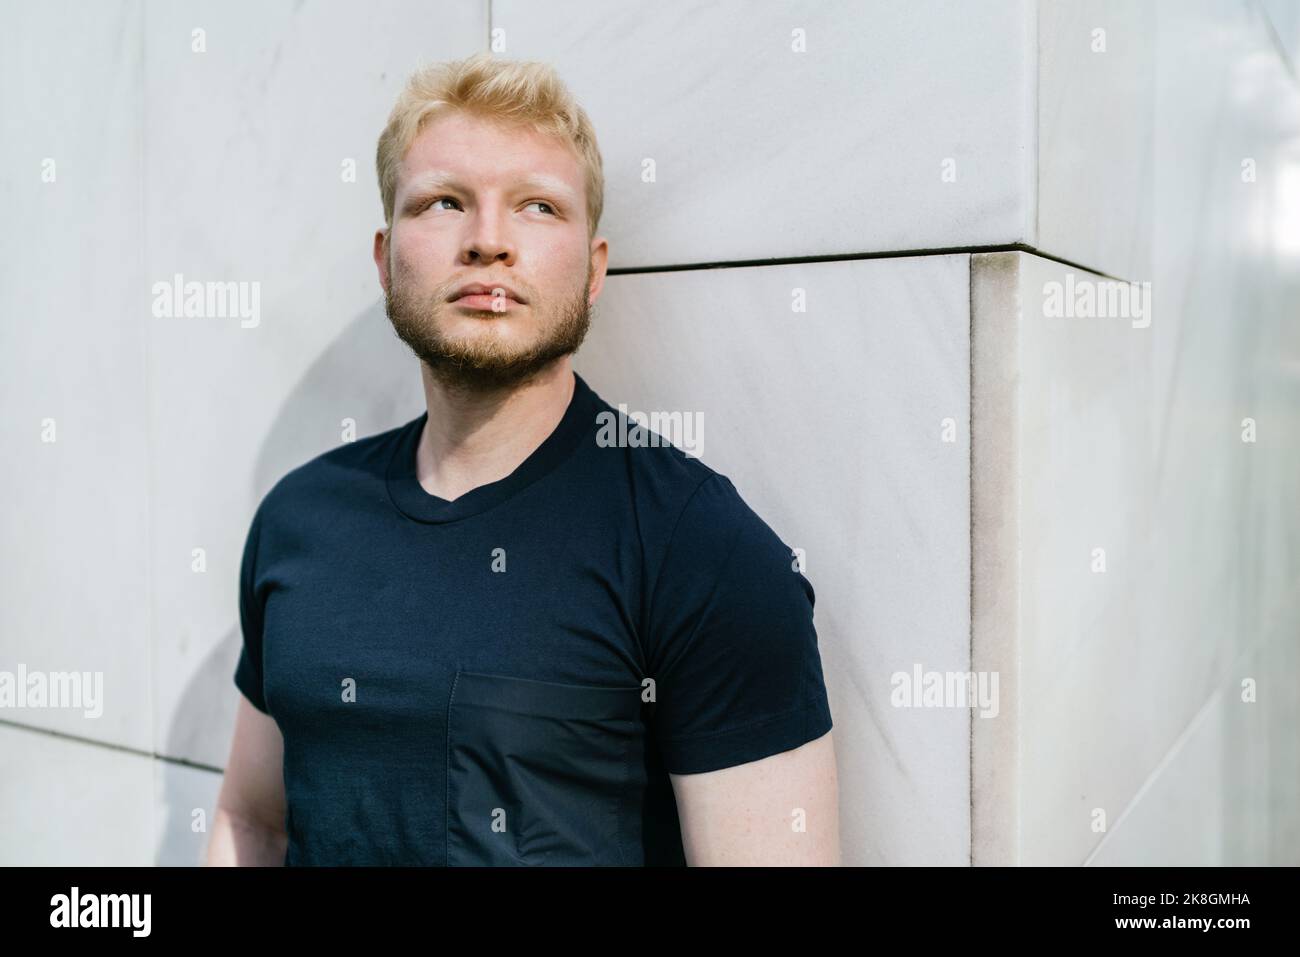 Pensive bearded adult blond haired man in black t shirt standing near white tiled wall looking away Stock Photo